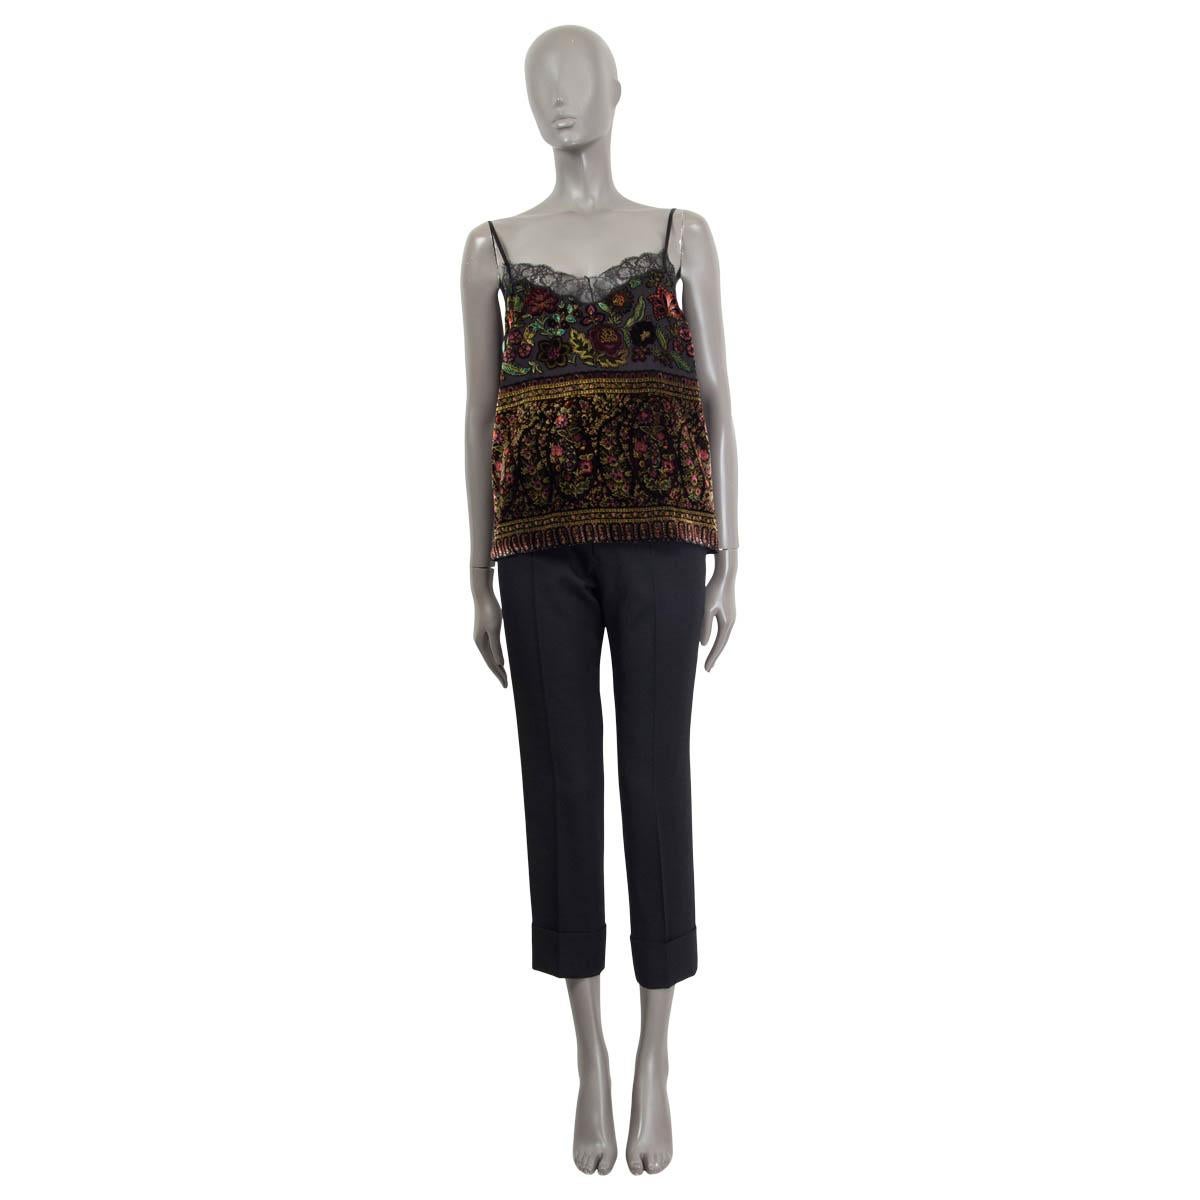 100% authentic Etro spaghetti top in black, burgundy and forrest green viscose (82%) and silk (18%) floral devore velvet. Embellished with  black lace at the neckline. Comes with adjustable straps. Lined in black silk (100%). Has been worn and is in